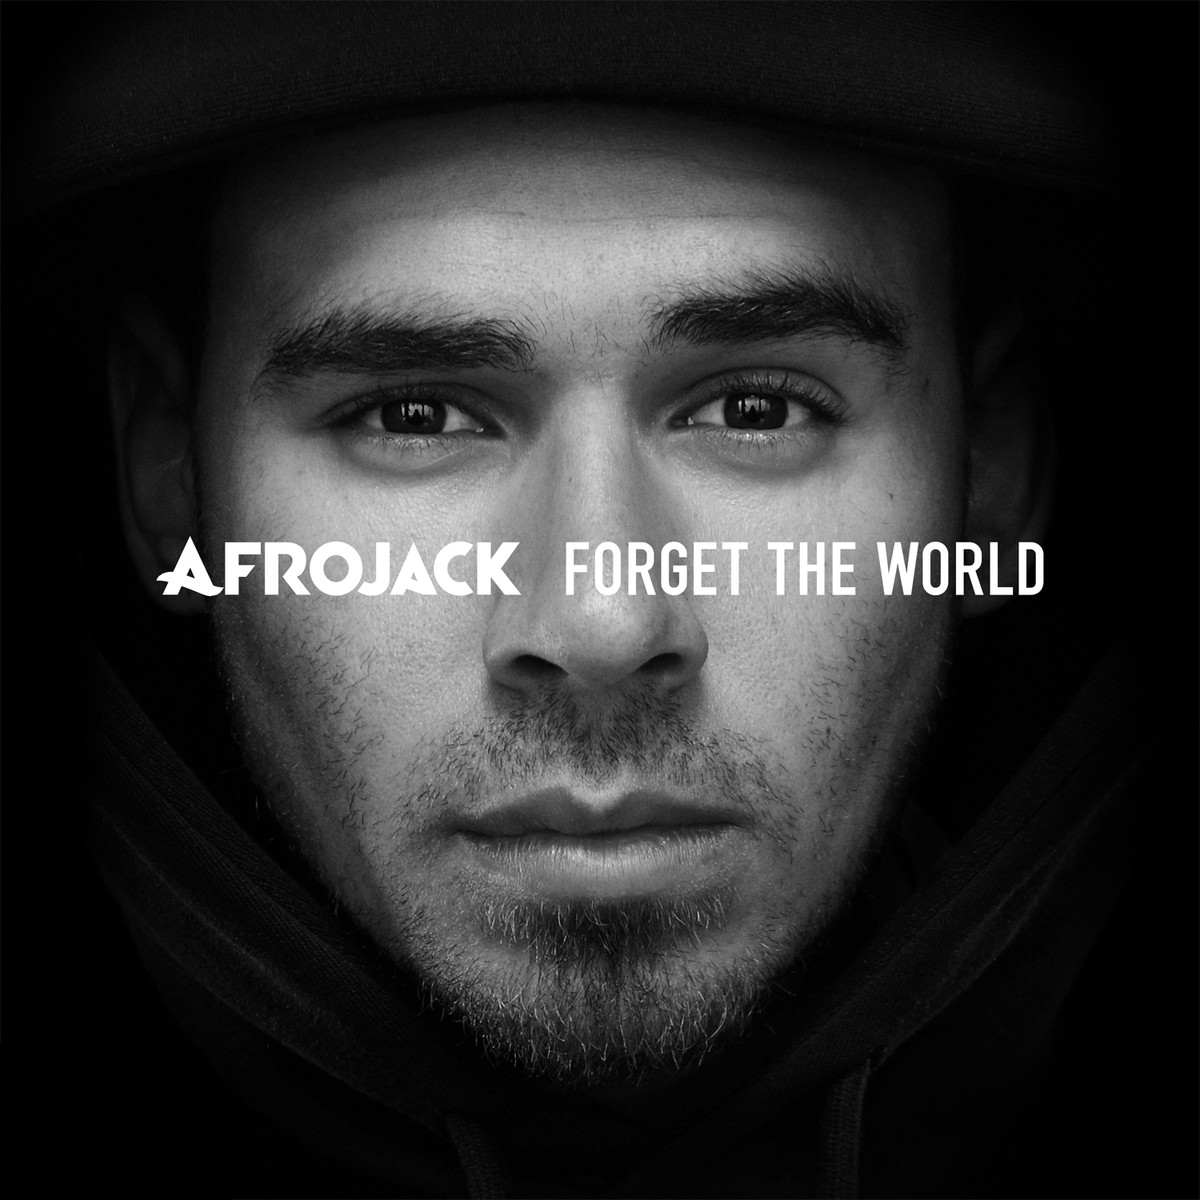 Afrojack-Forget-the-World-2014-1200x1200.png